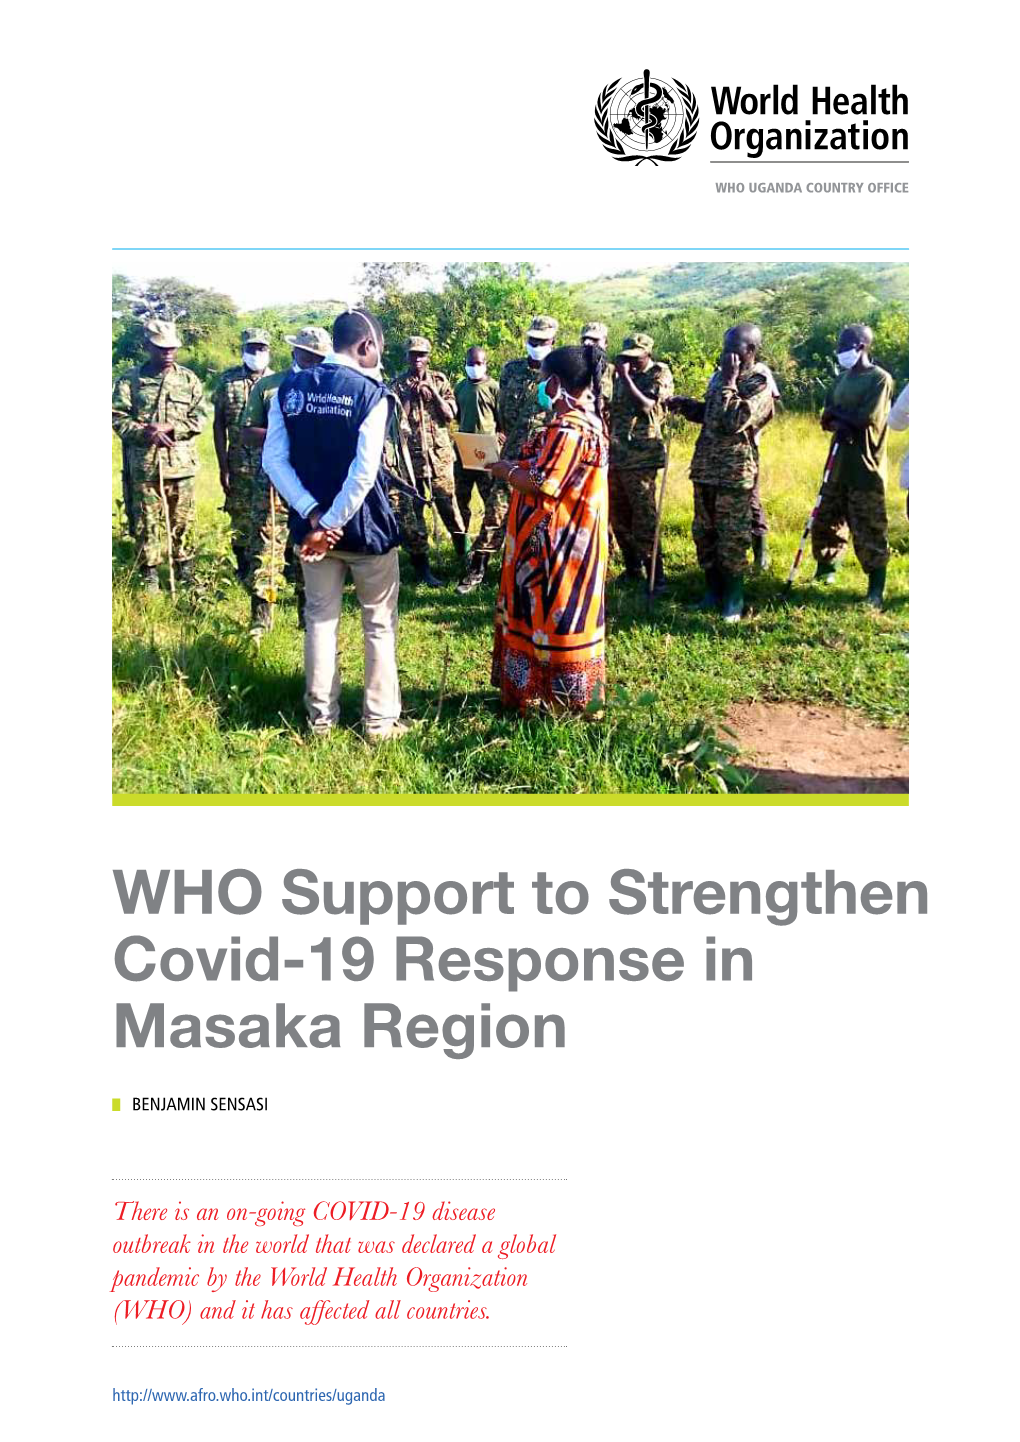 WHO Support to Strengthen Covid-19 Response in Masaka Region